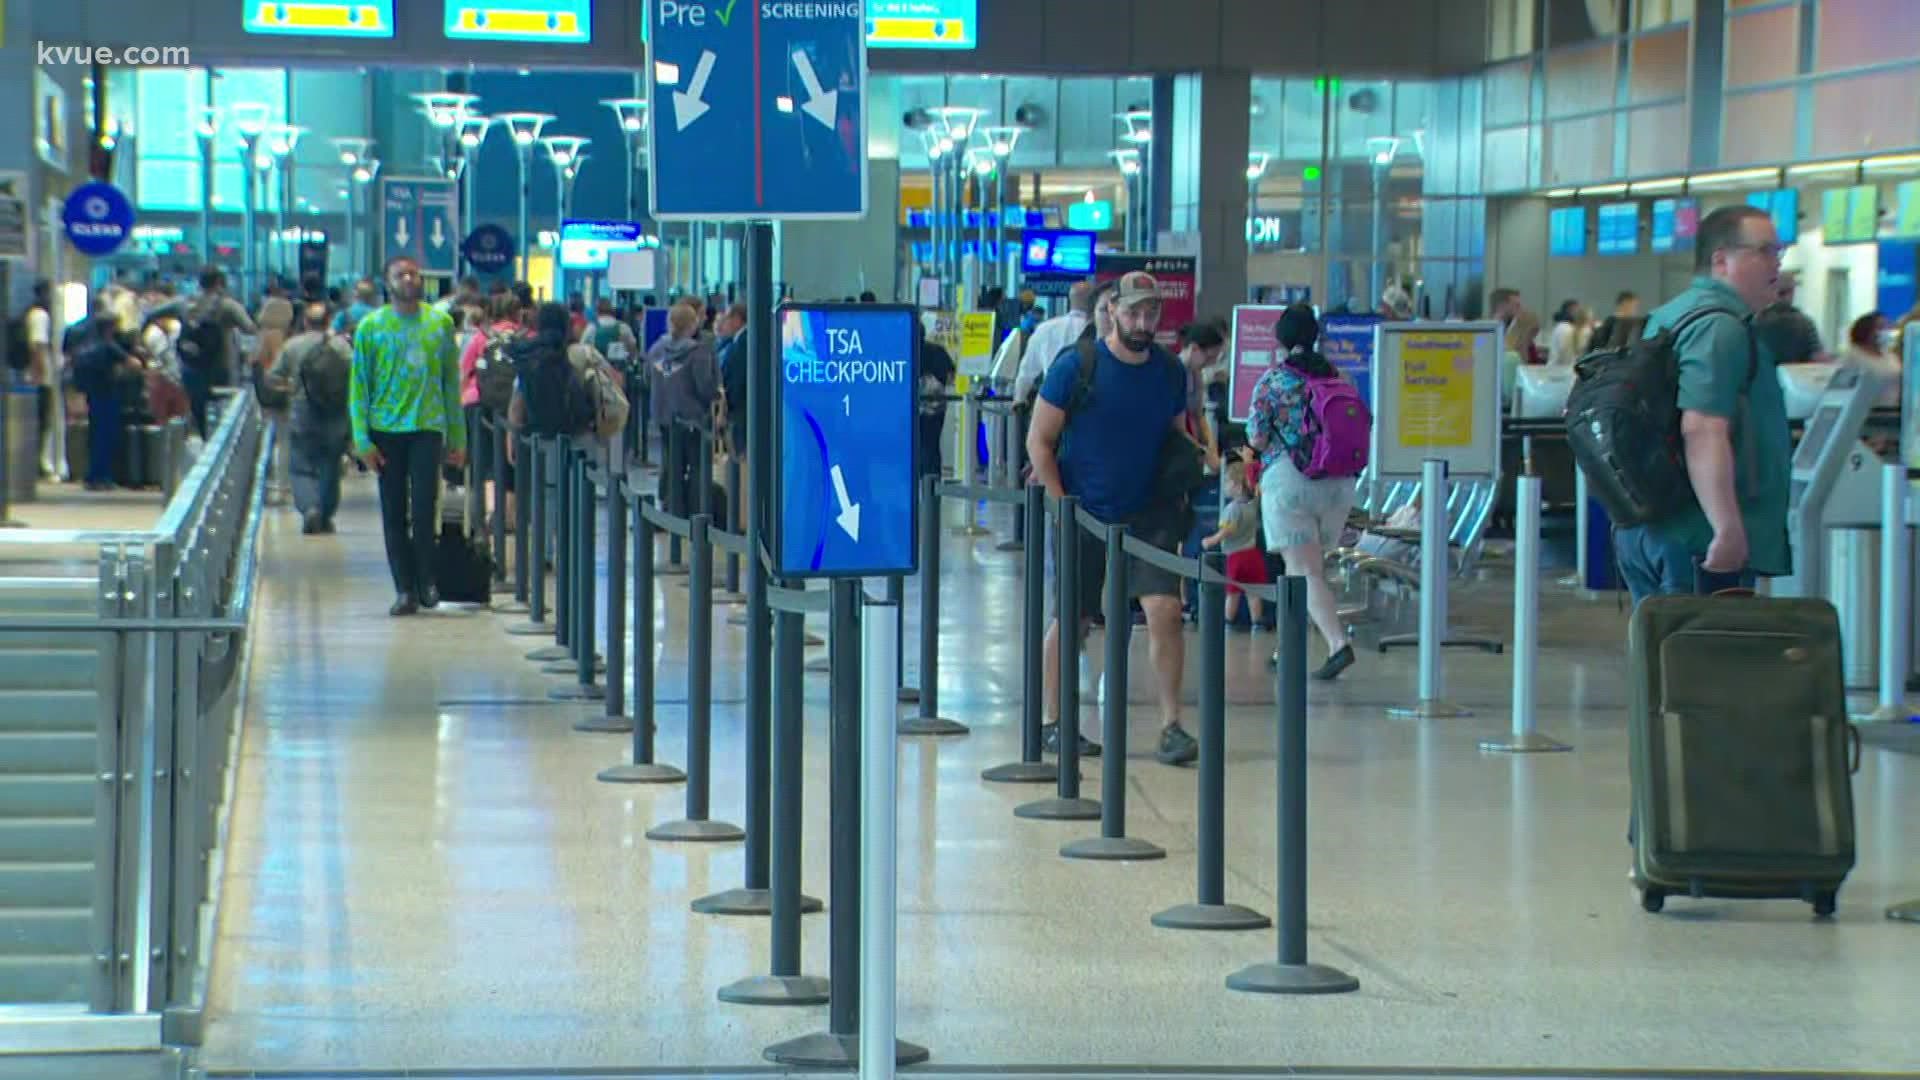 U.S. Rep. Lloyd Doggett is renewing his call for improvements to the security screening process at Austin's airport. KVUE's Bryce Newberry has the latest.